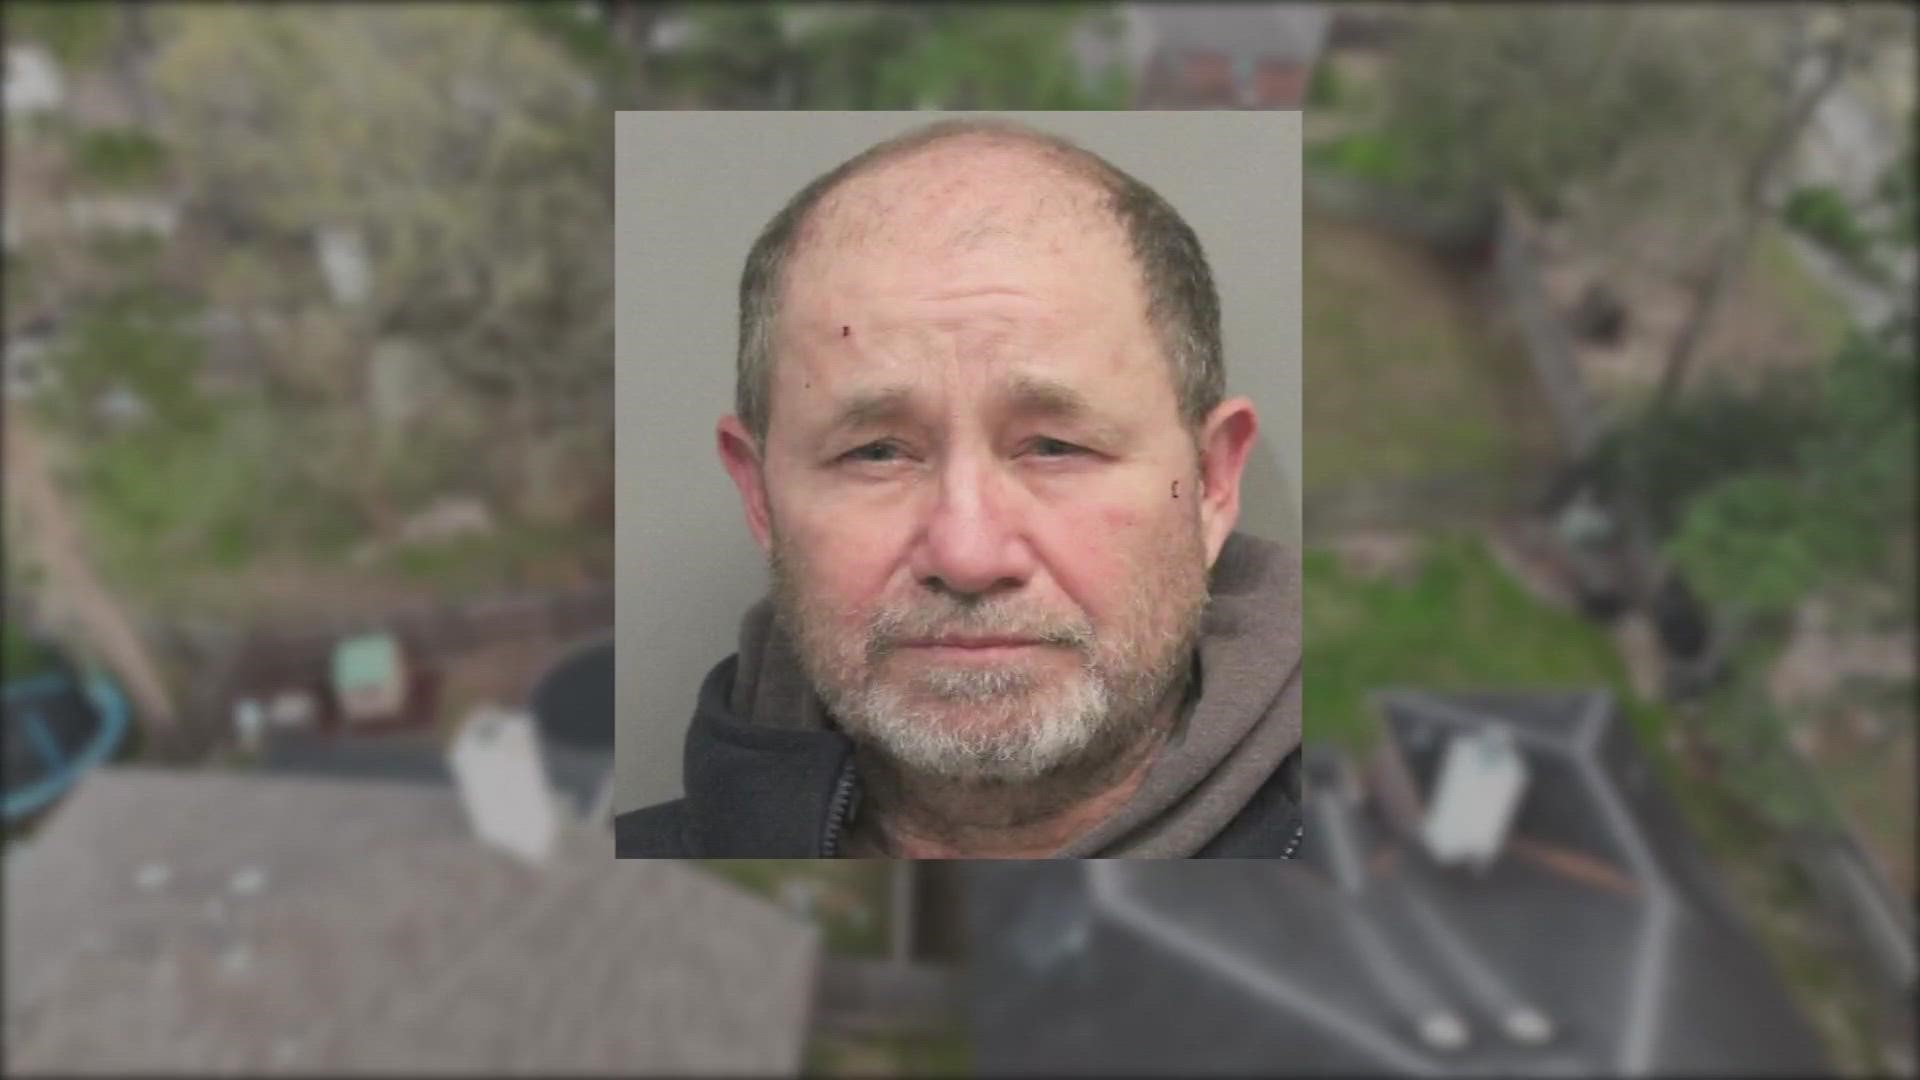 Russell Day is accused of being intoxicated when he opened fire on his neighbor's house with an AR-15-style rifle because their dogs were barking.